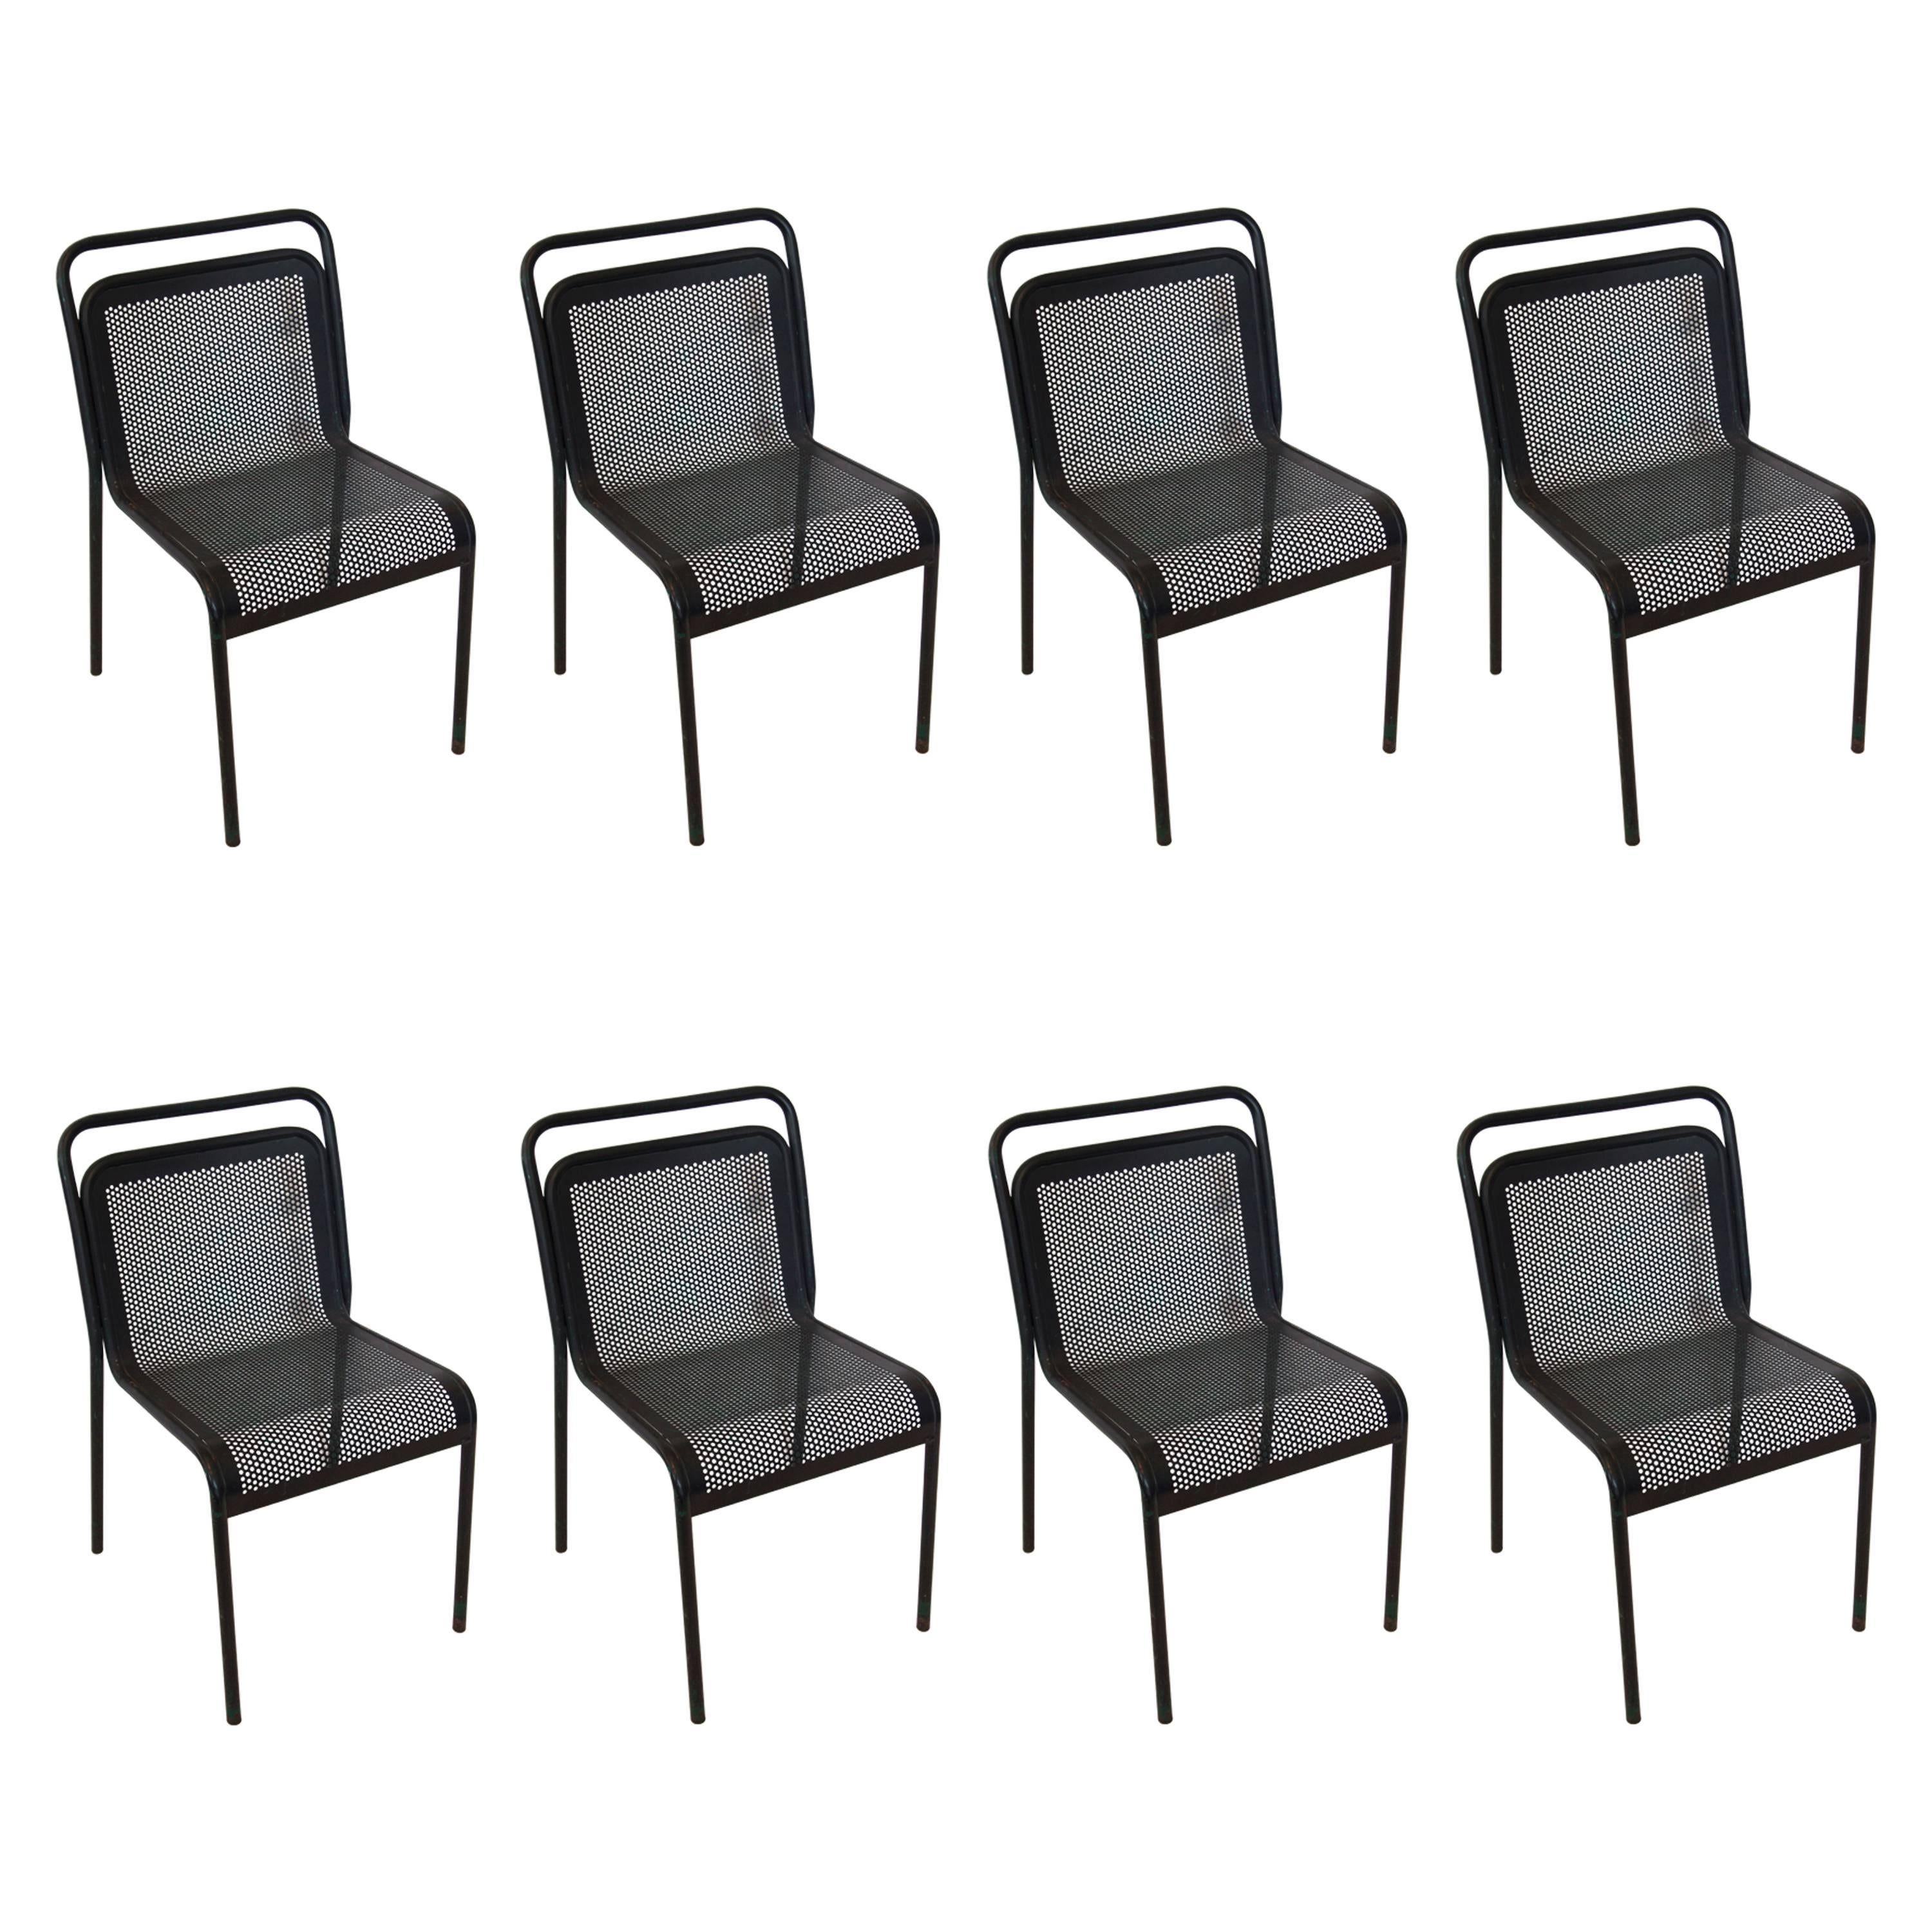 Set of 5 Mid-Century Metal Garden Chairs For Sale